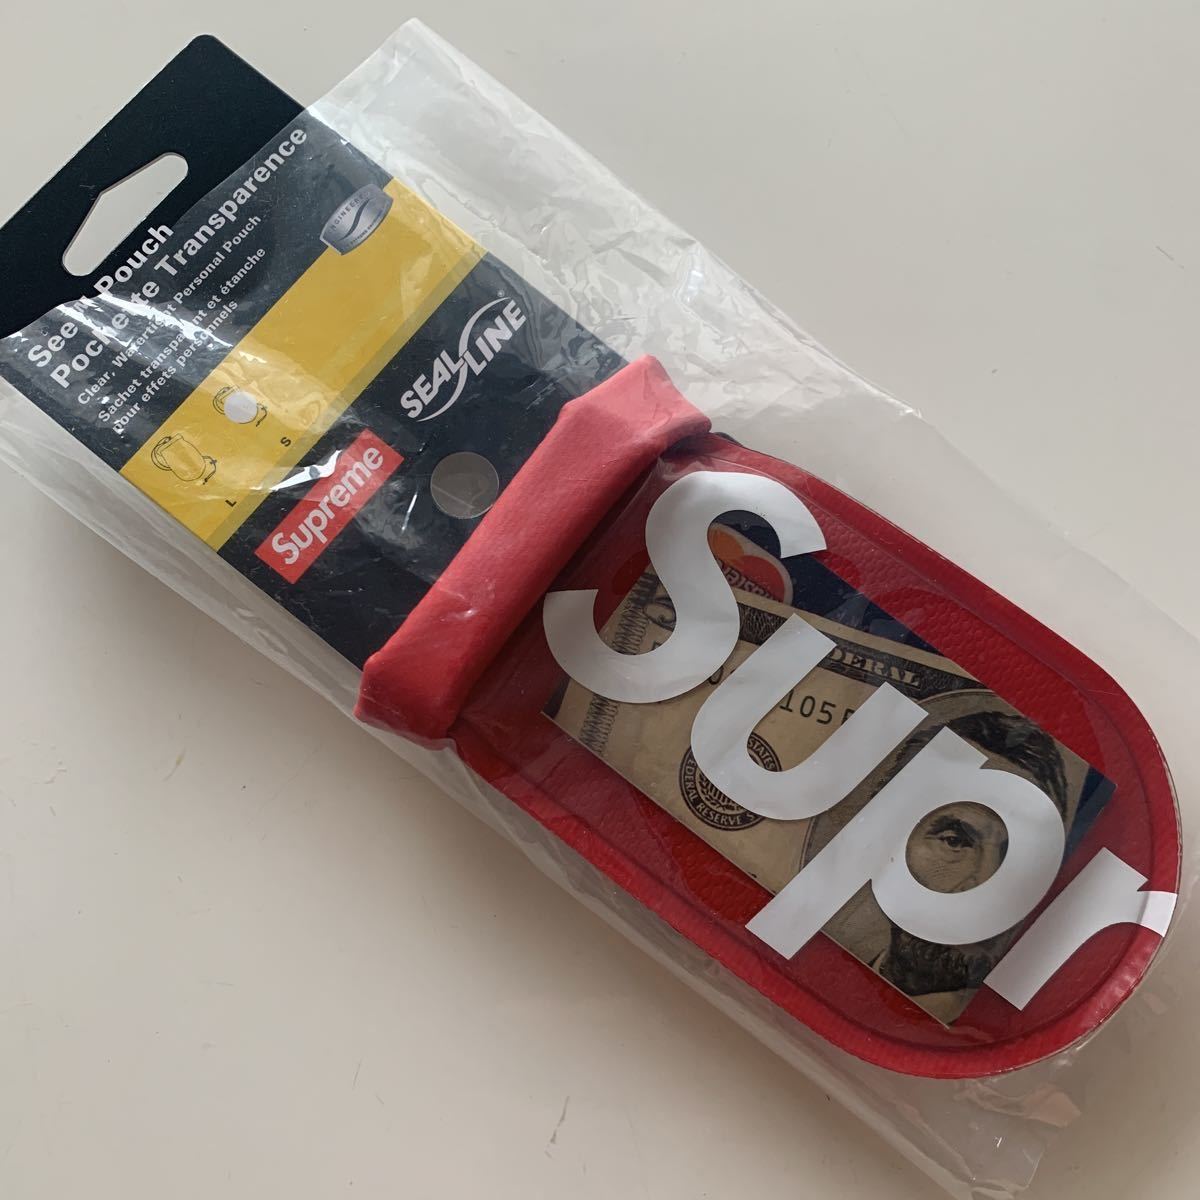 Supreme SealLine See Pouch Small Red Sサイズ シュプリーム ポーチ スモール レッド 新品未使用